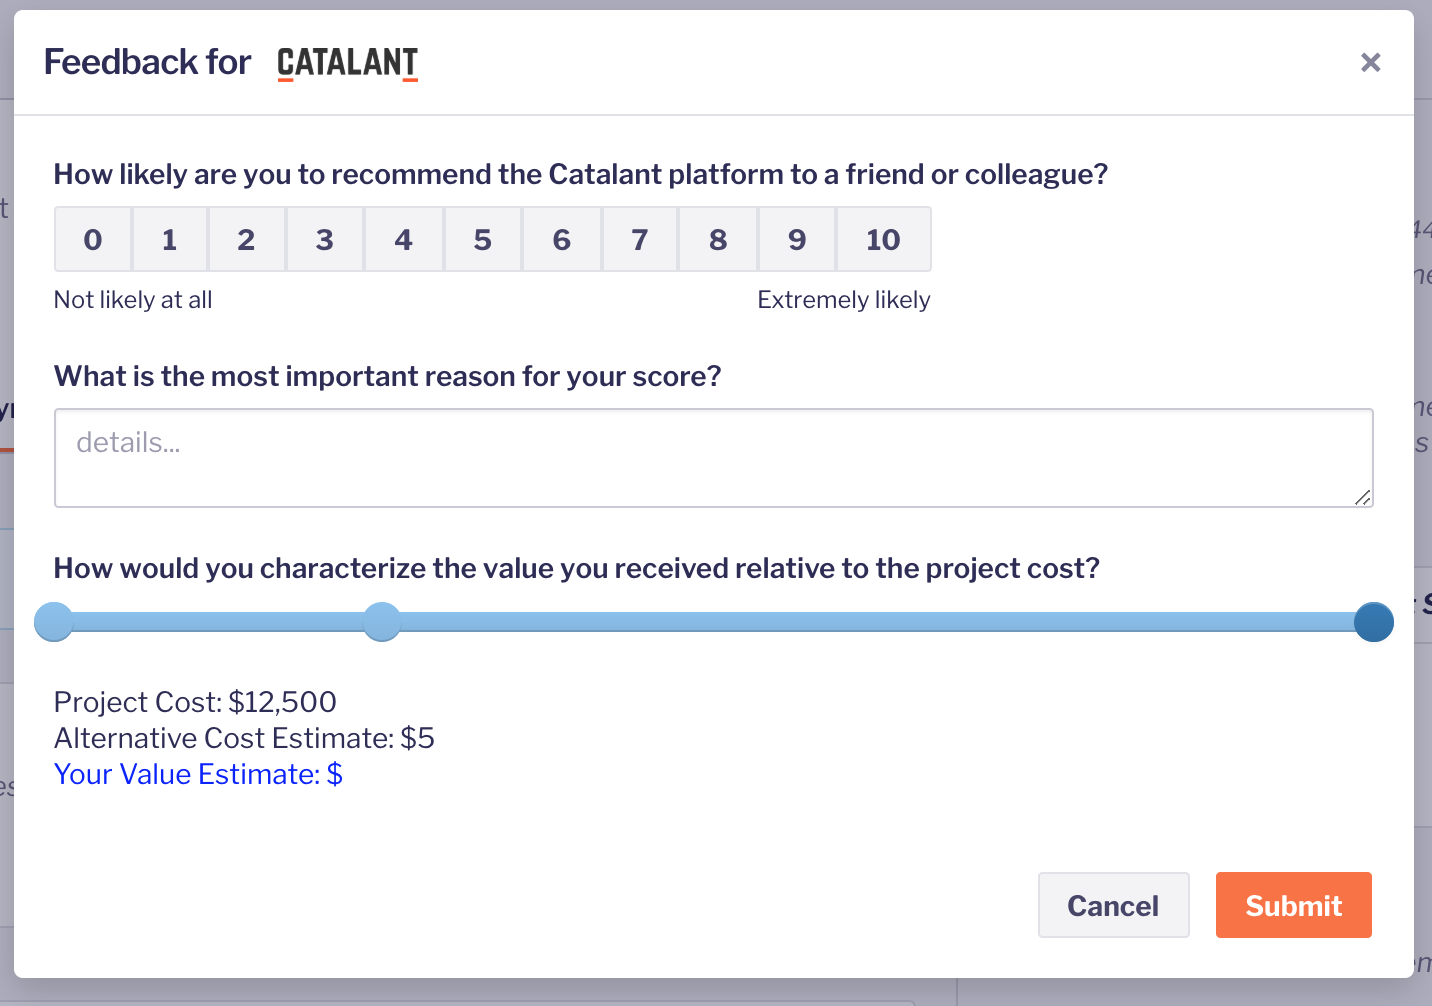 Feedback_for_Catalant.png